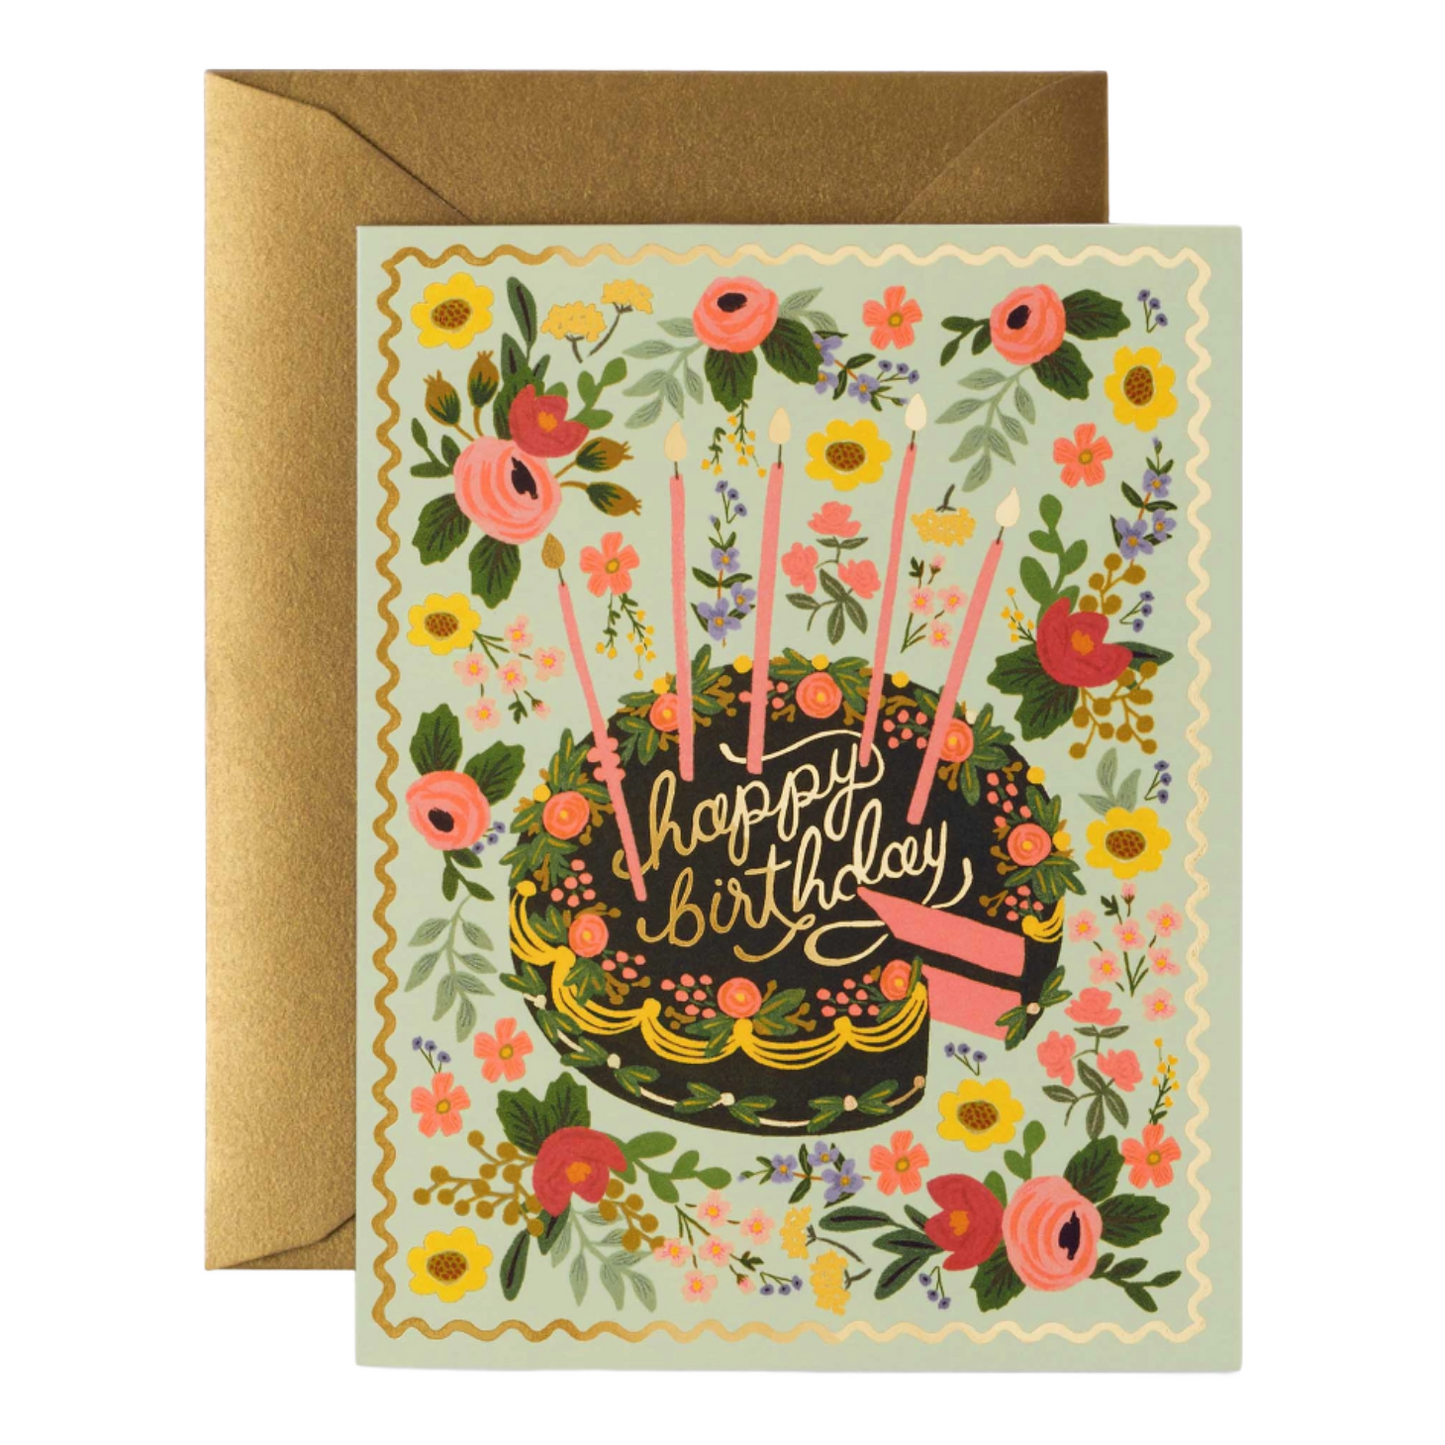 Floral Birthday Cake Card by Rifle Paper Co.